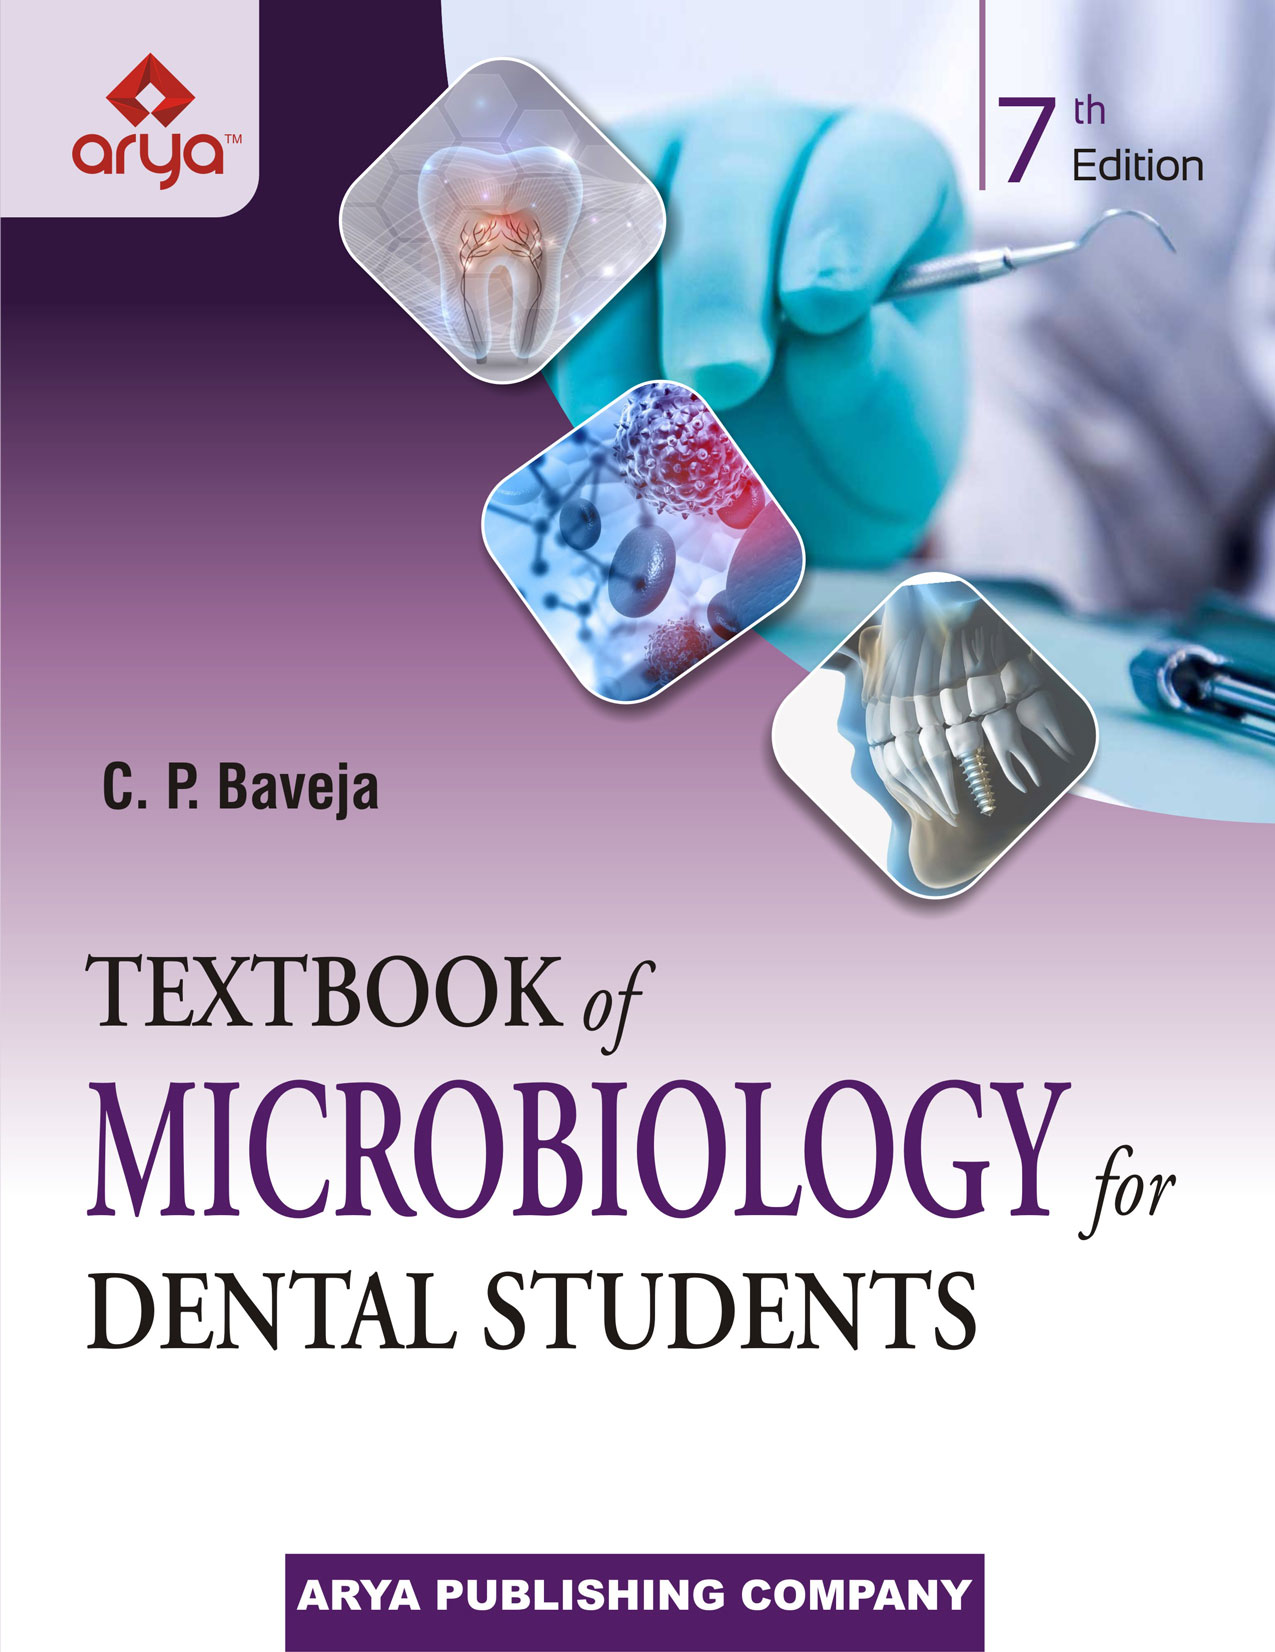 Textbook of Microbiology for Dental Students